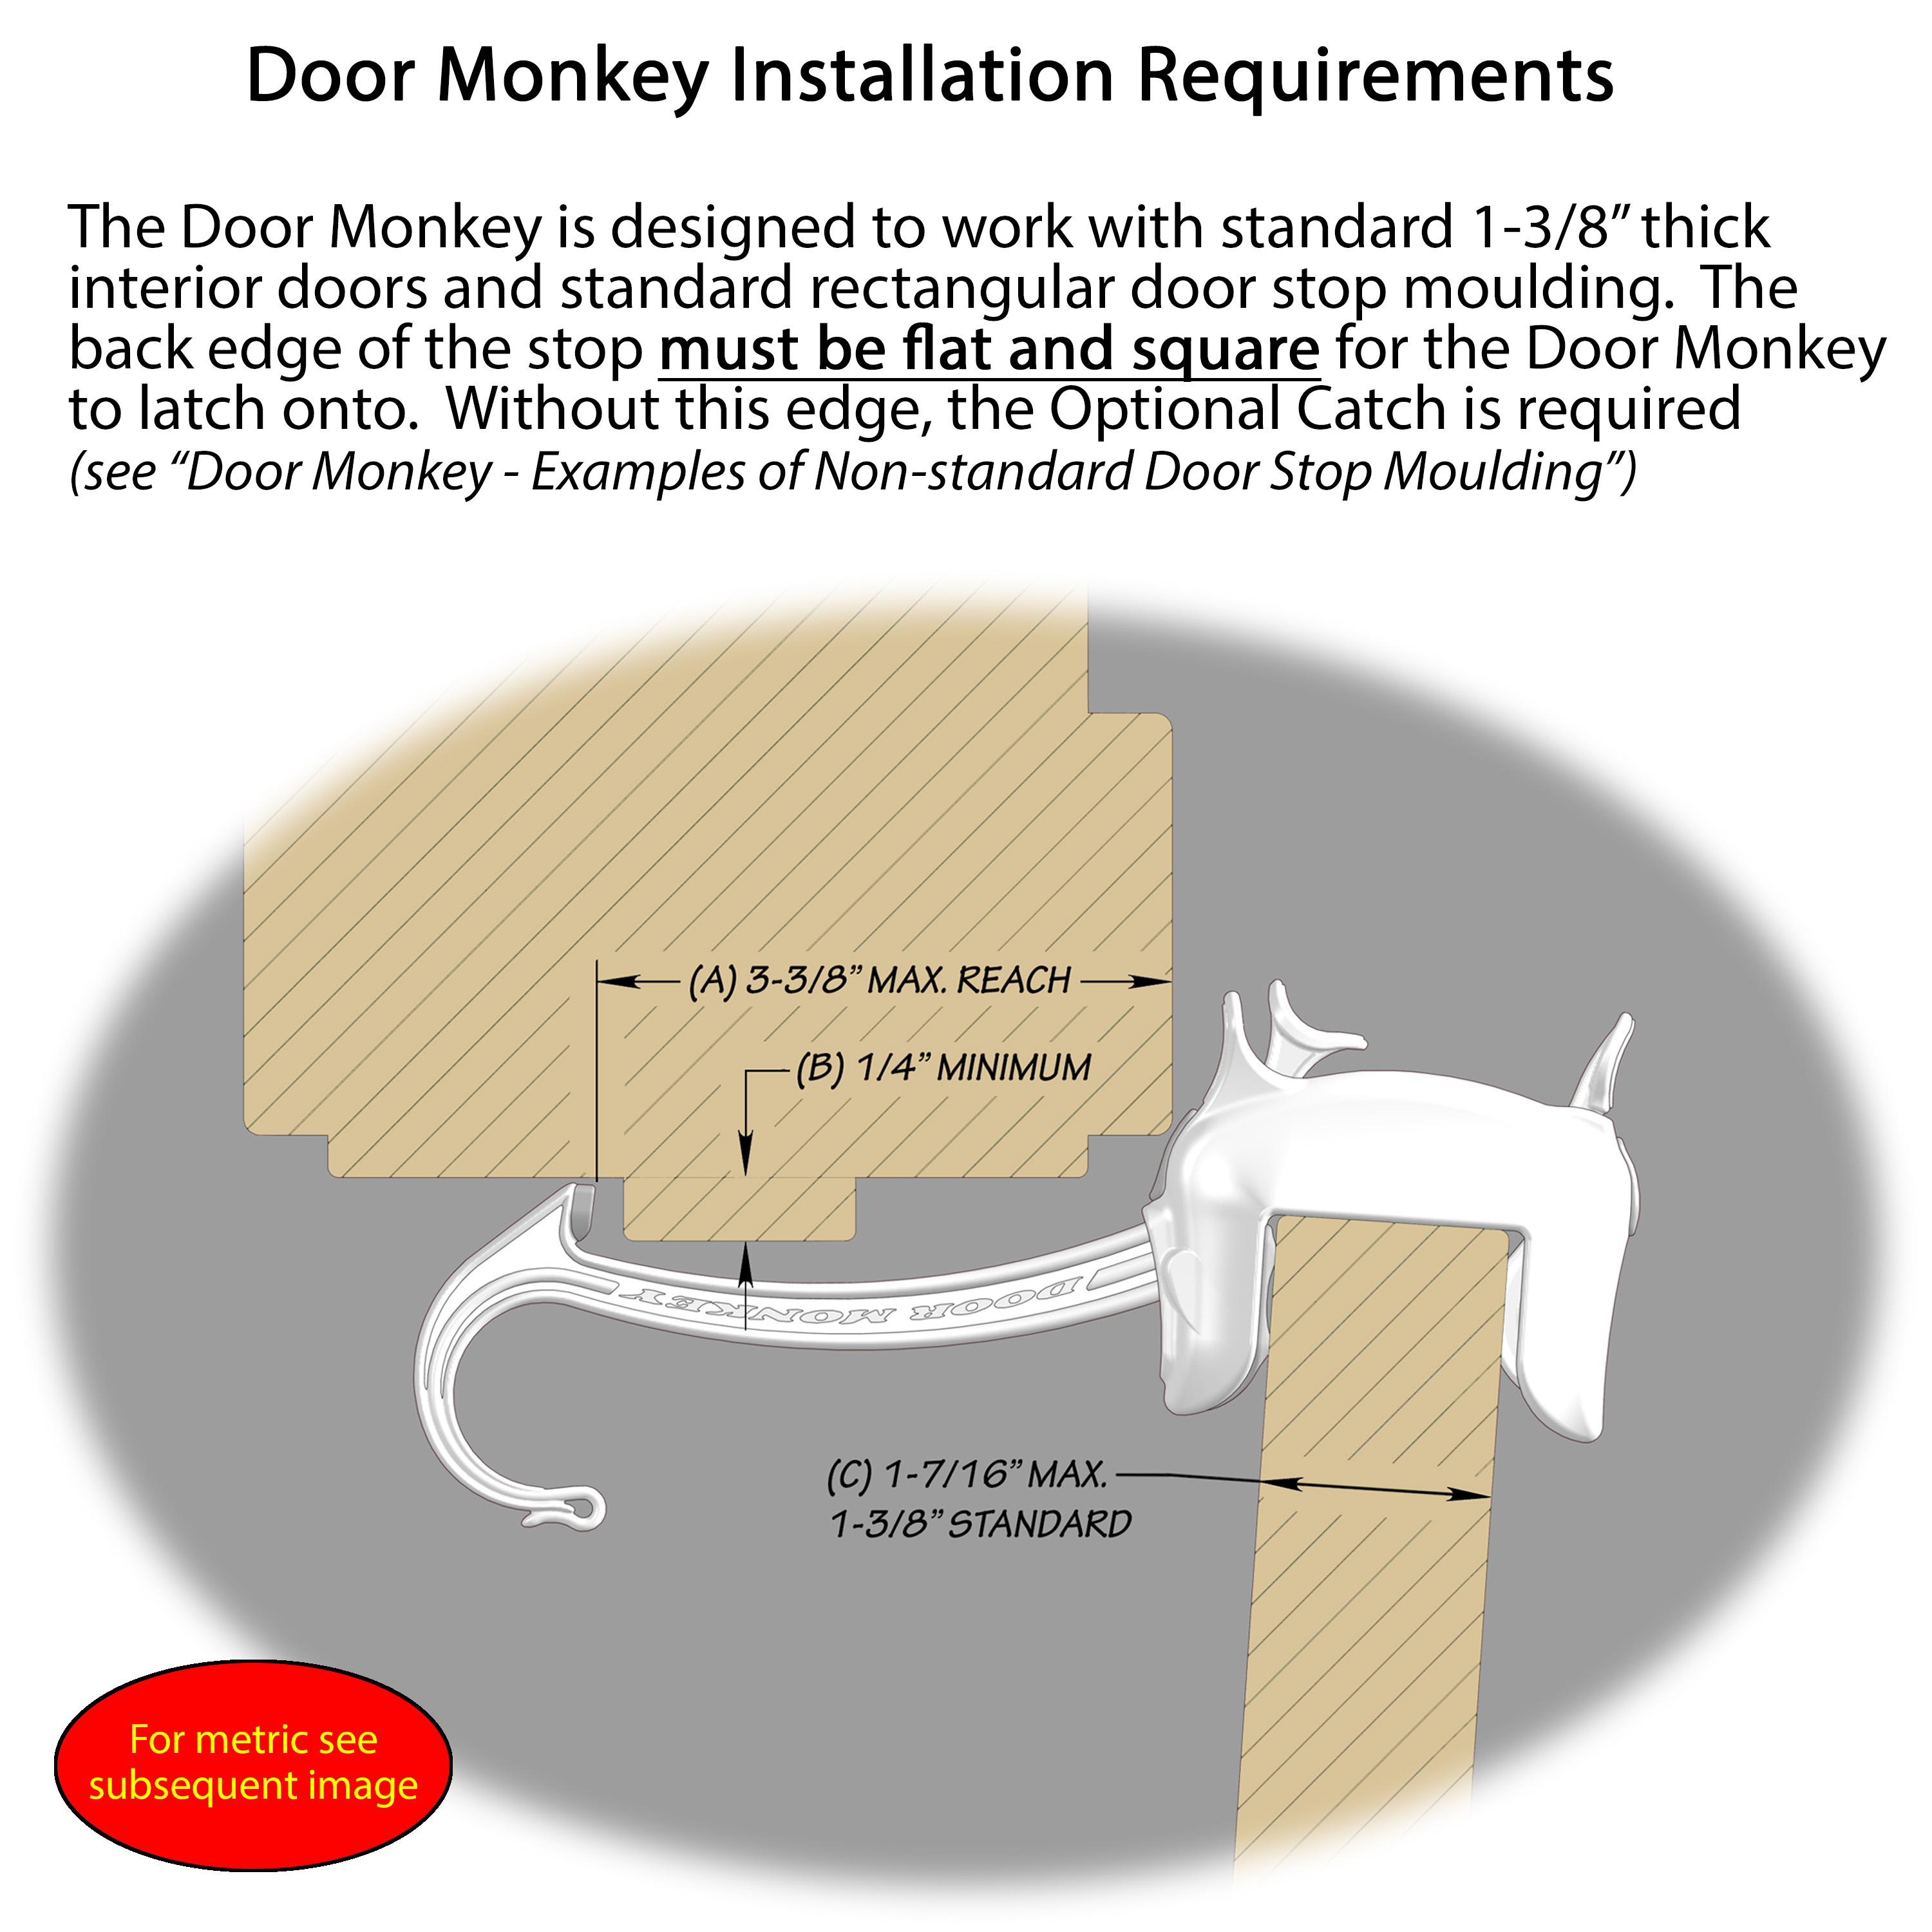 DOOR MONKEY Child Proof Door Lock & Pinch Guard - For Door Knobs & Lever Handles- Easy to Install-No Tools or Tape Required - Baby Safety Door Lock For Kids - Very Portable-Great for Dogs & Cats,White - image 5 of 8